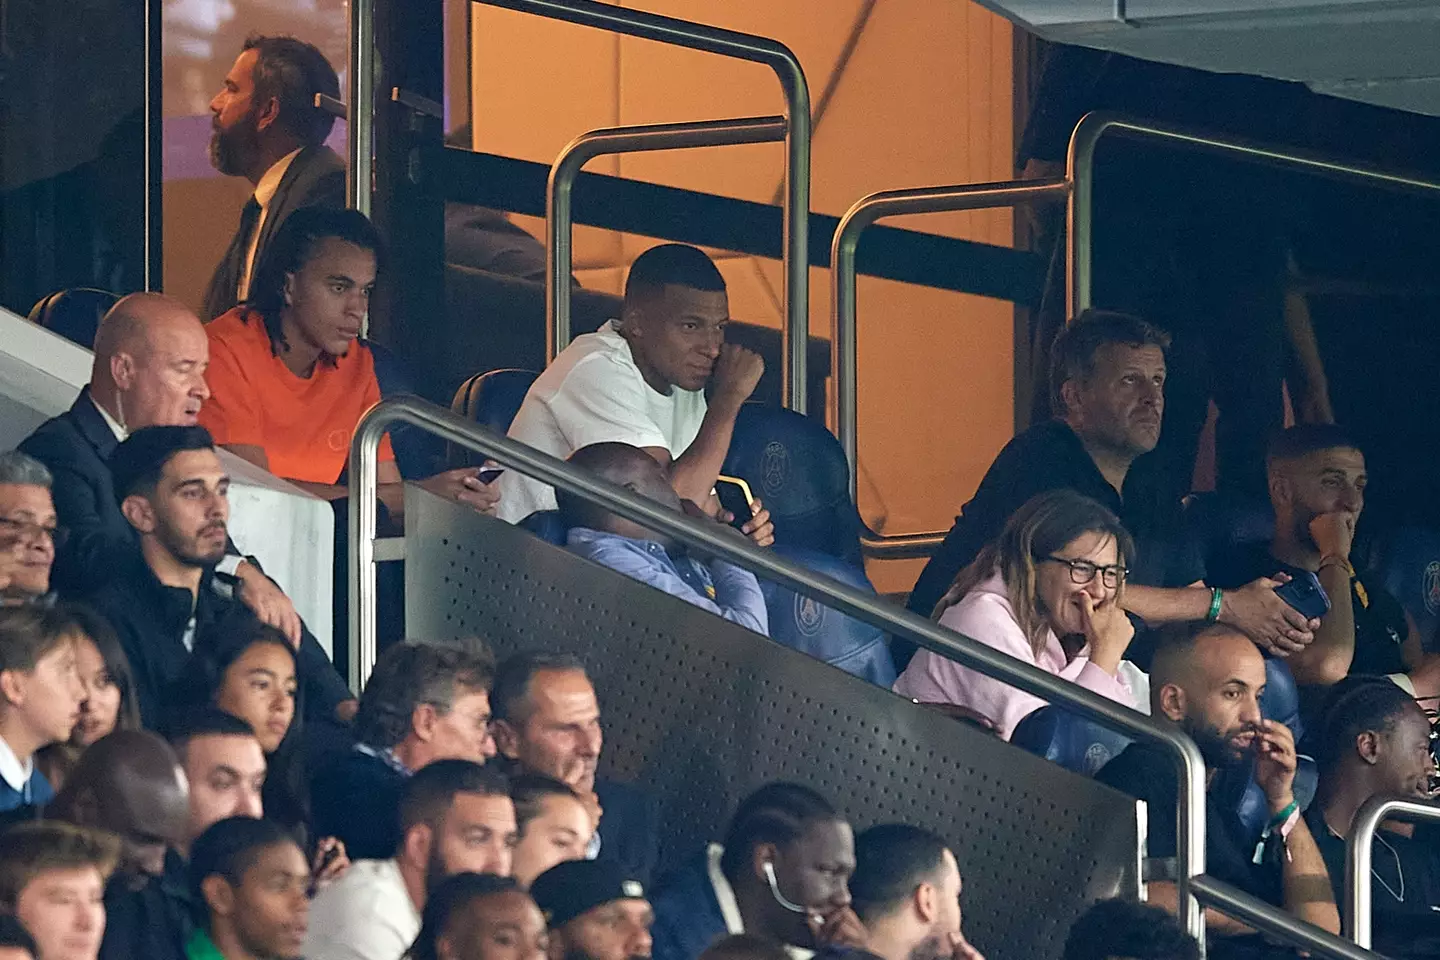 Kylian Mbappe watches Paris Saint-Germain vs. Lorient from the stands. Image: Getty